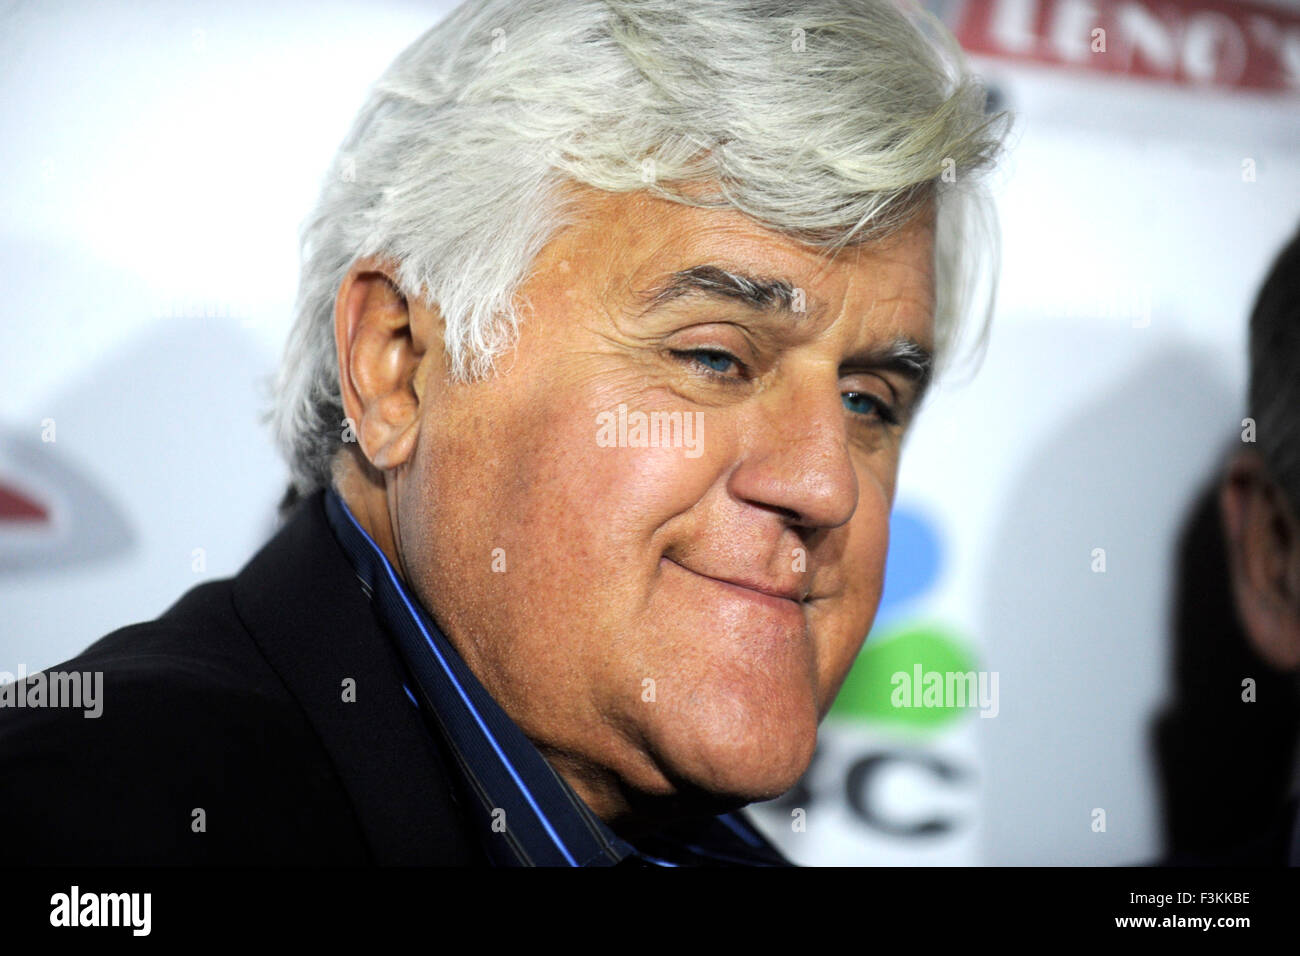 Jay Leno bei der Launch Party zur TV-Serie 'Jay Leno's Garage' in der Ink 48 Press Lounge. New York, 07.10.2015/picture alliance Stock Photo